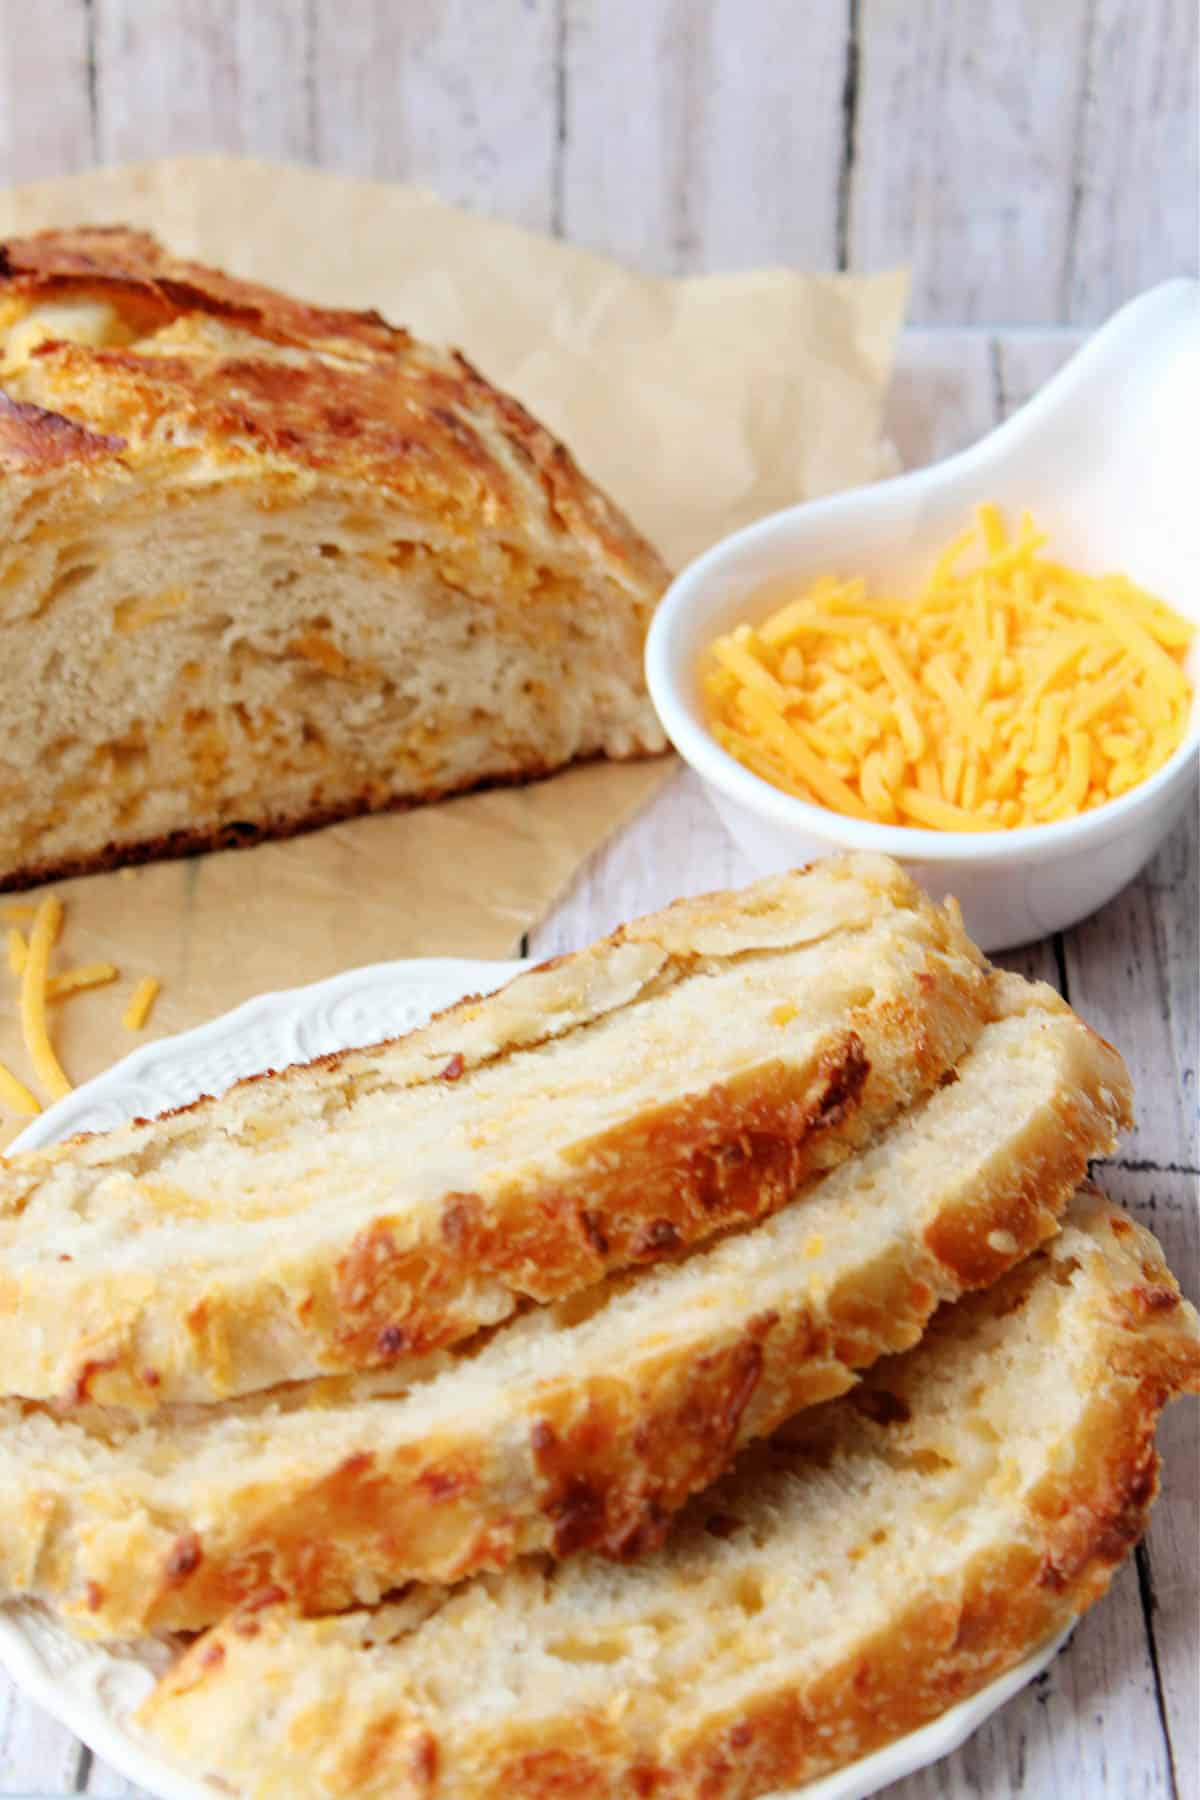 Cheddar bread partially sliced with a bowl of cheddar on side.